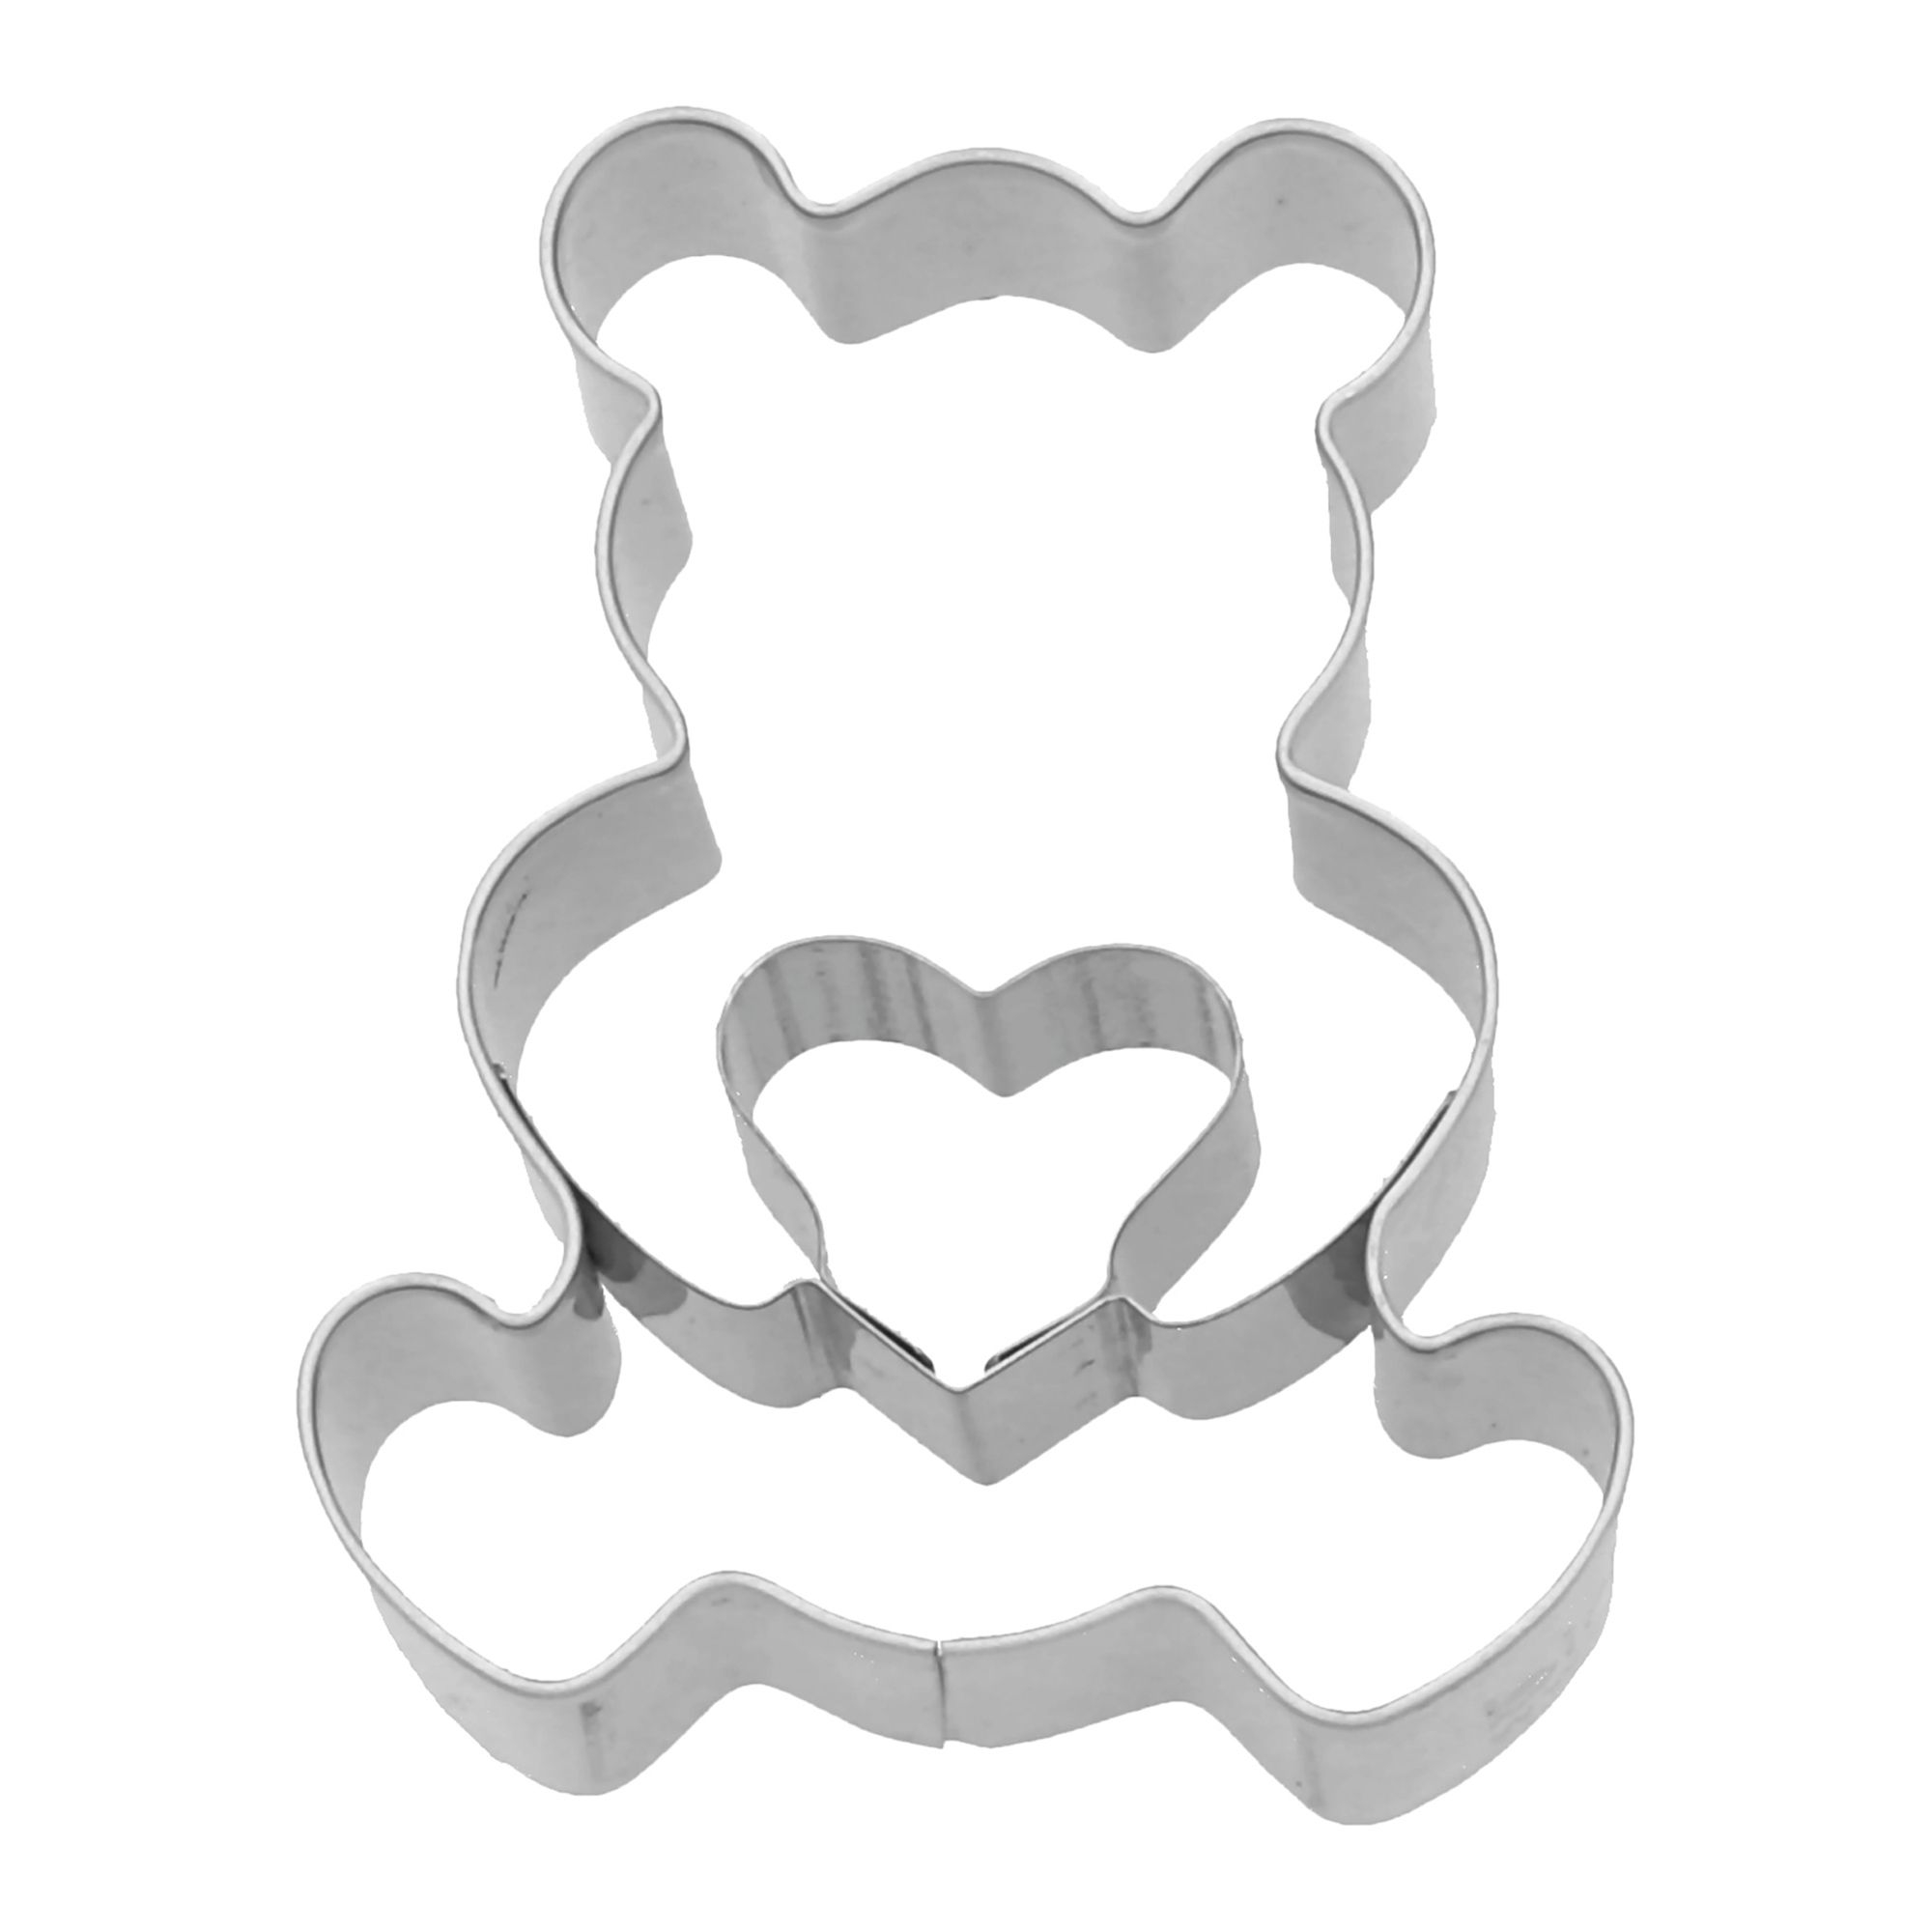 Embossed Gummy Bear Cookie Cutter